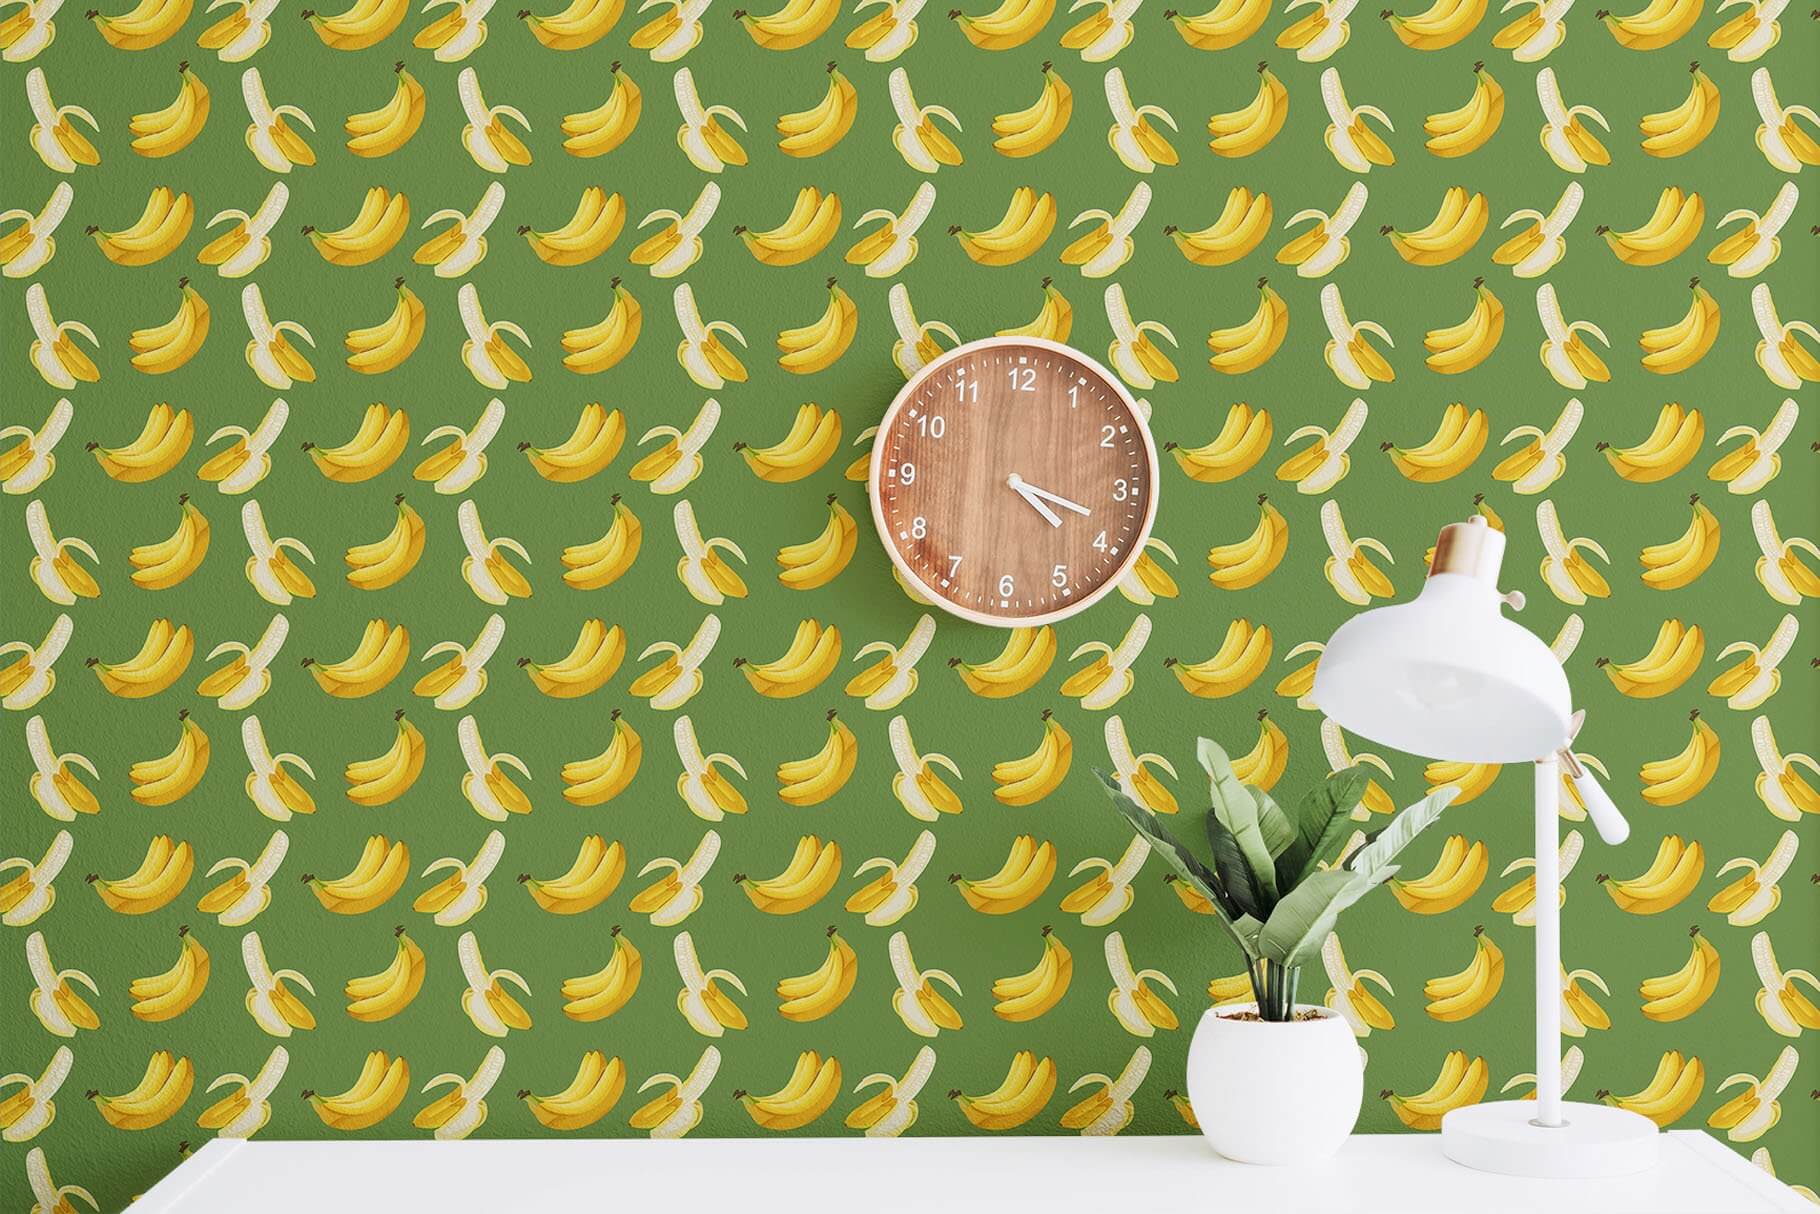 Pattern with bananas on paper wallpaper.